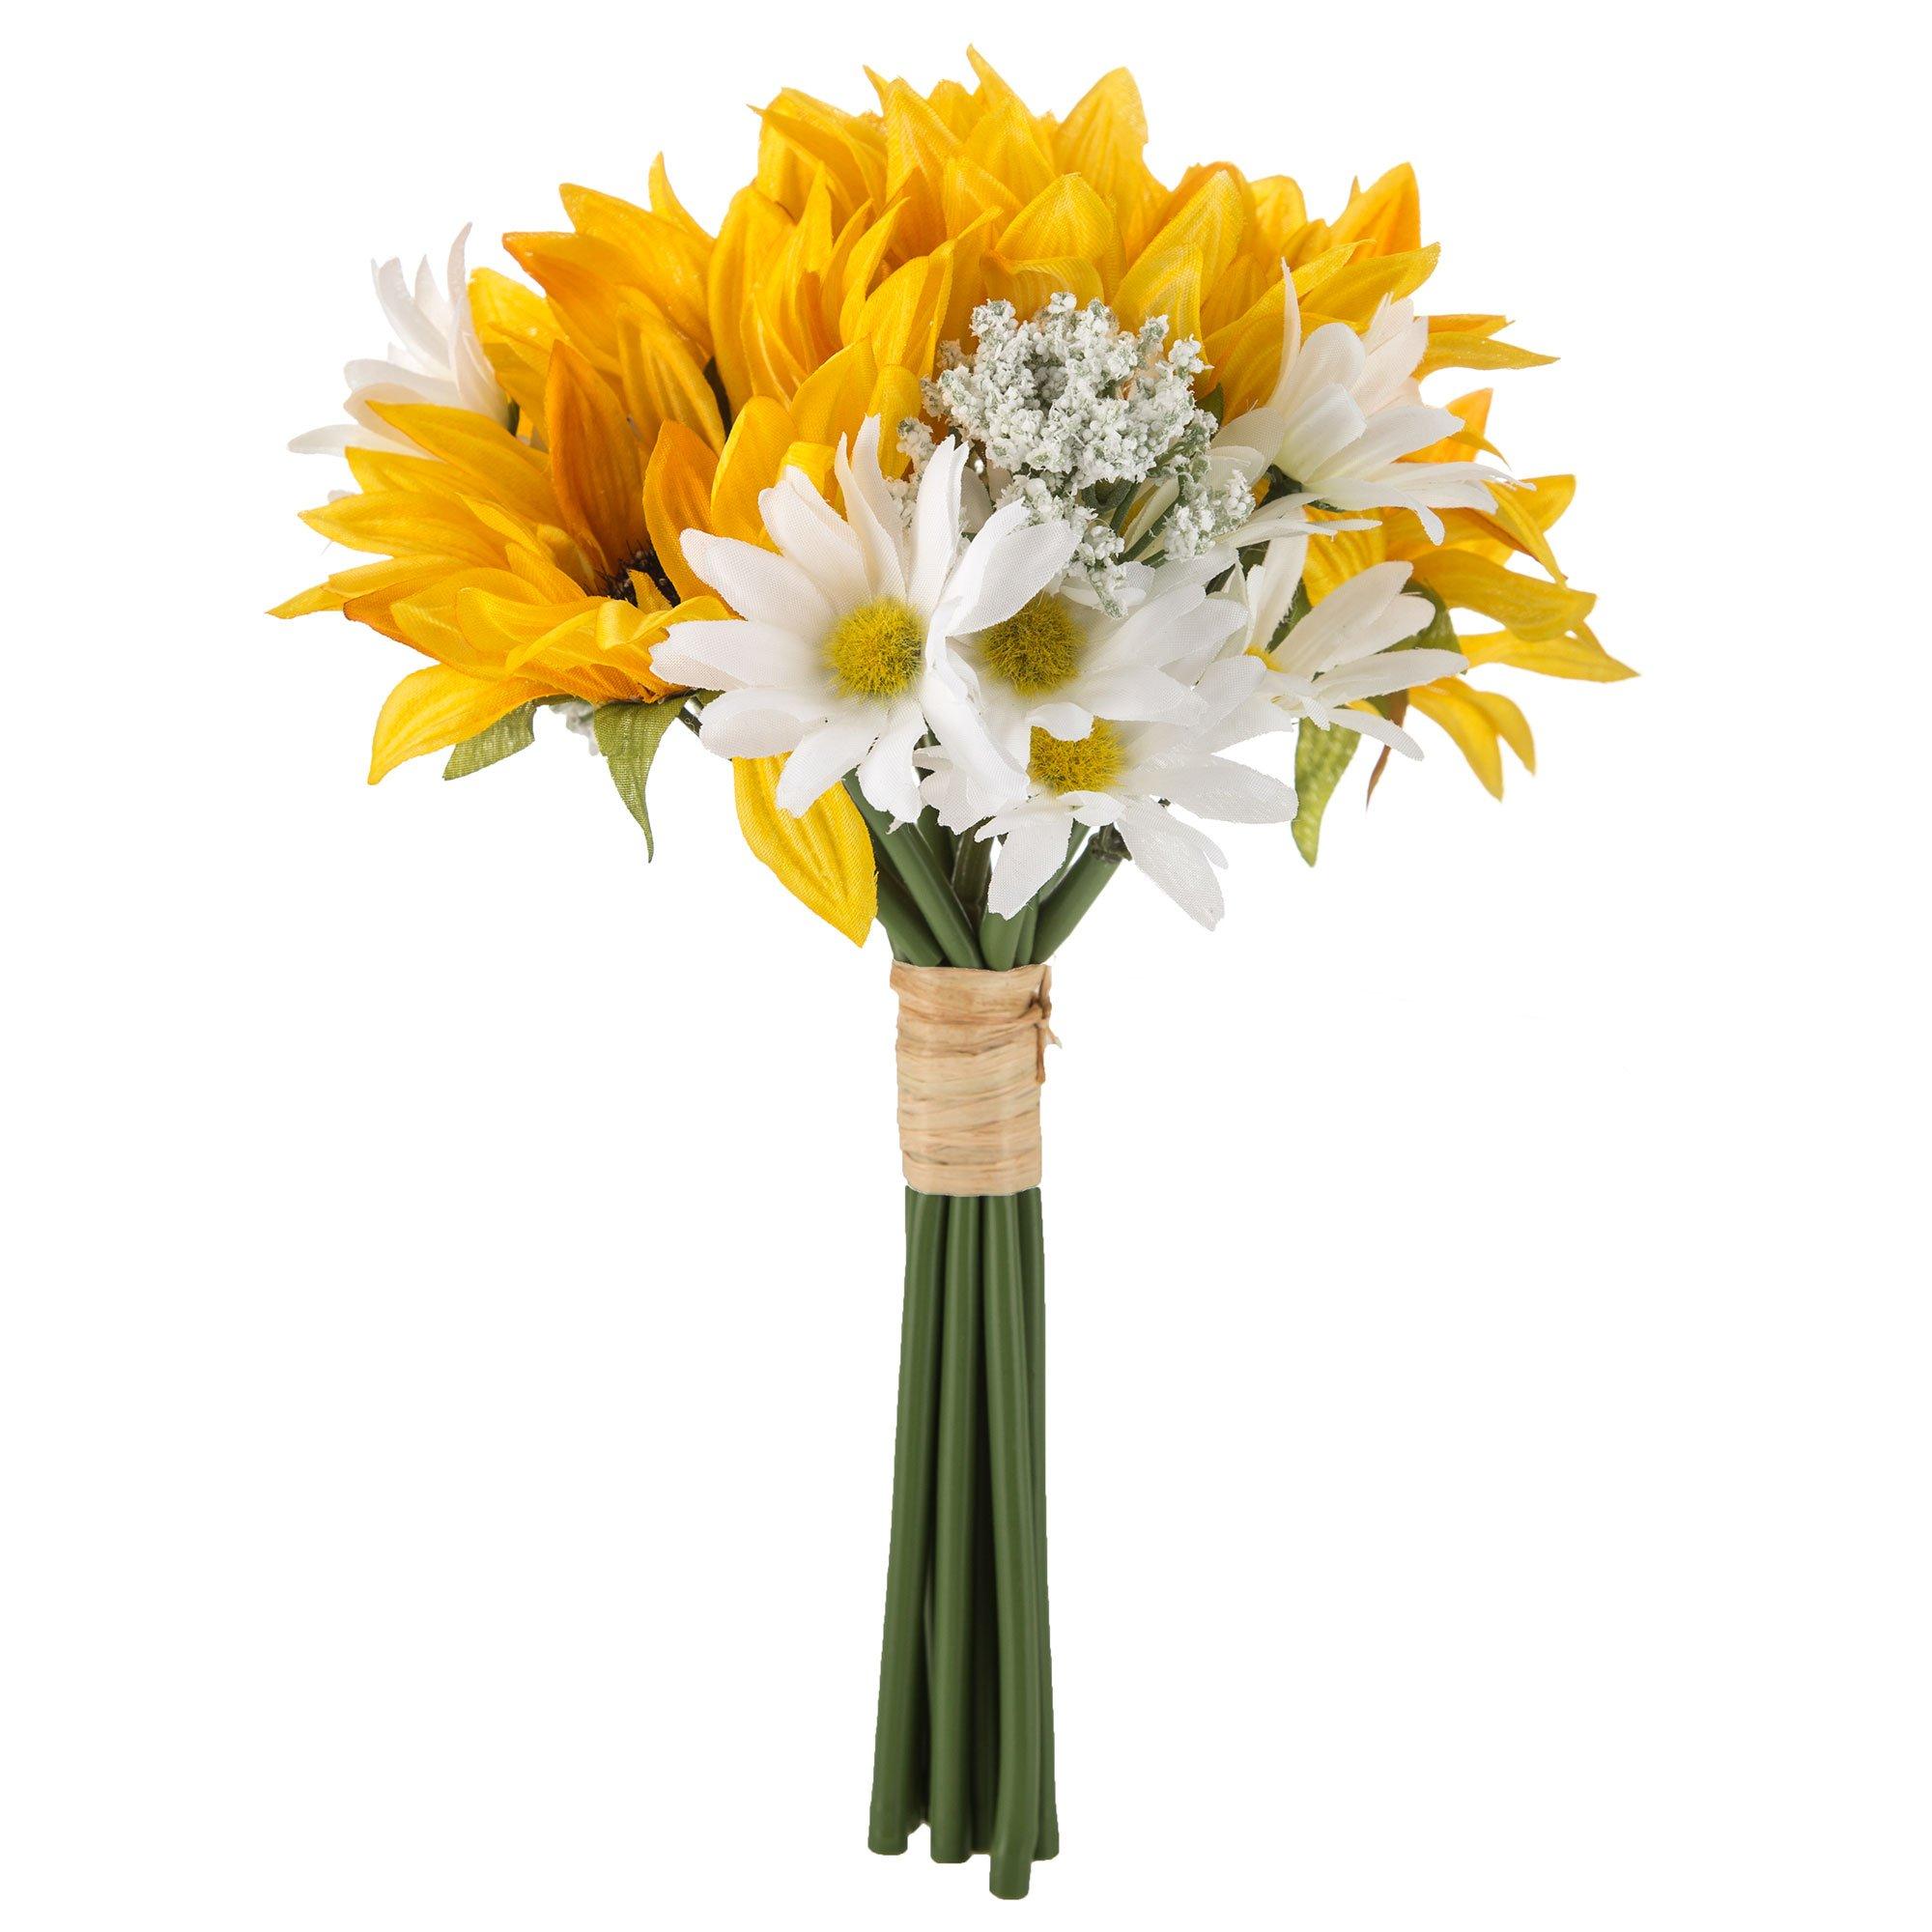 daisies and sunflowers bouquet